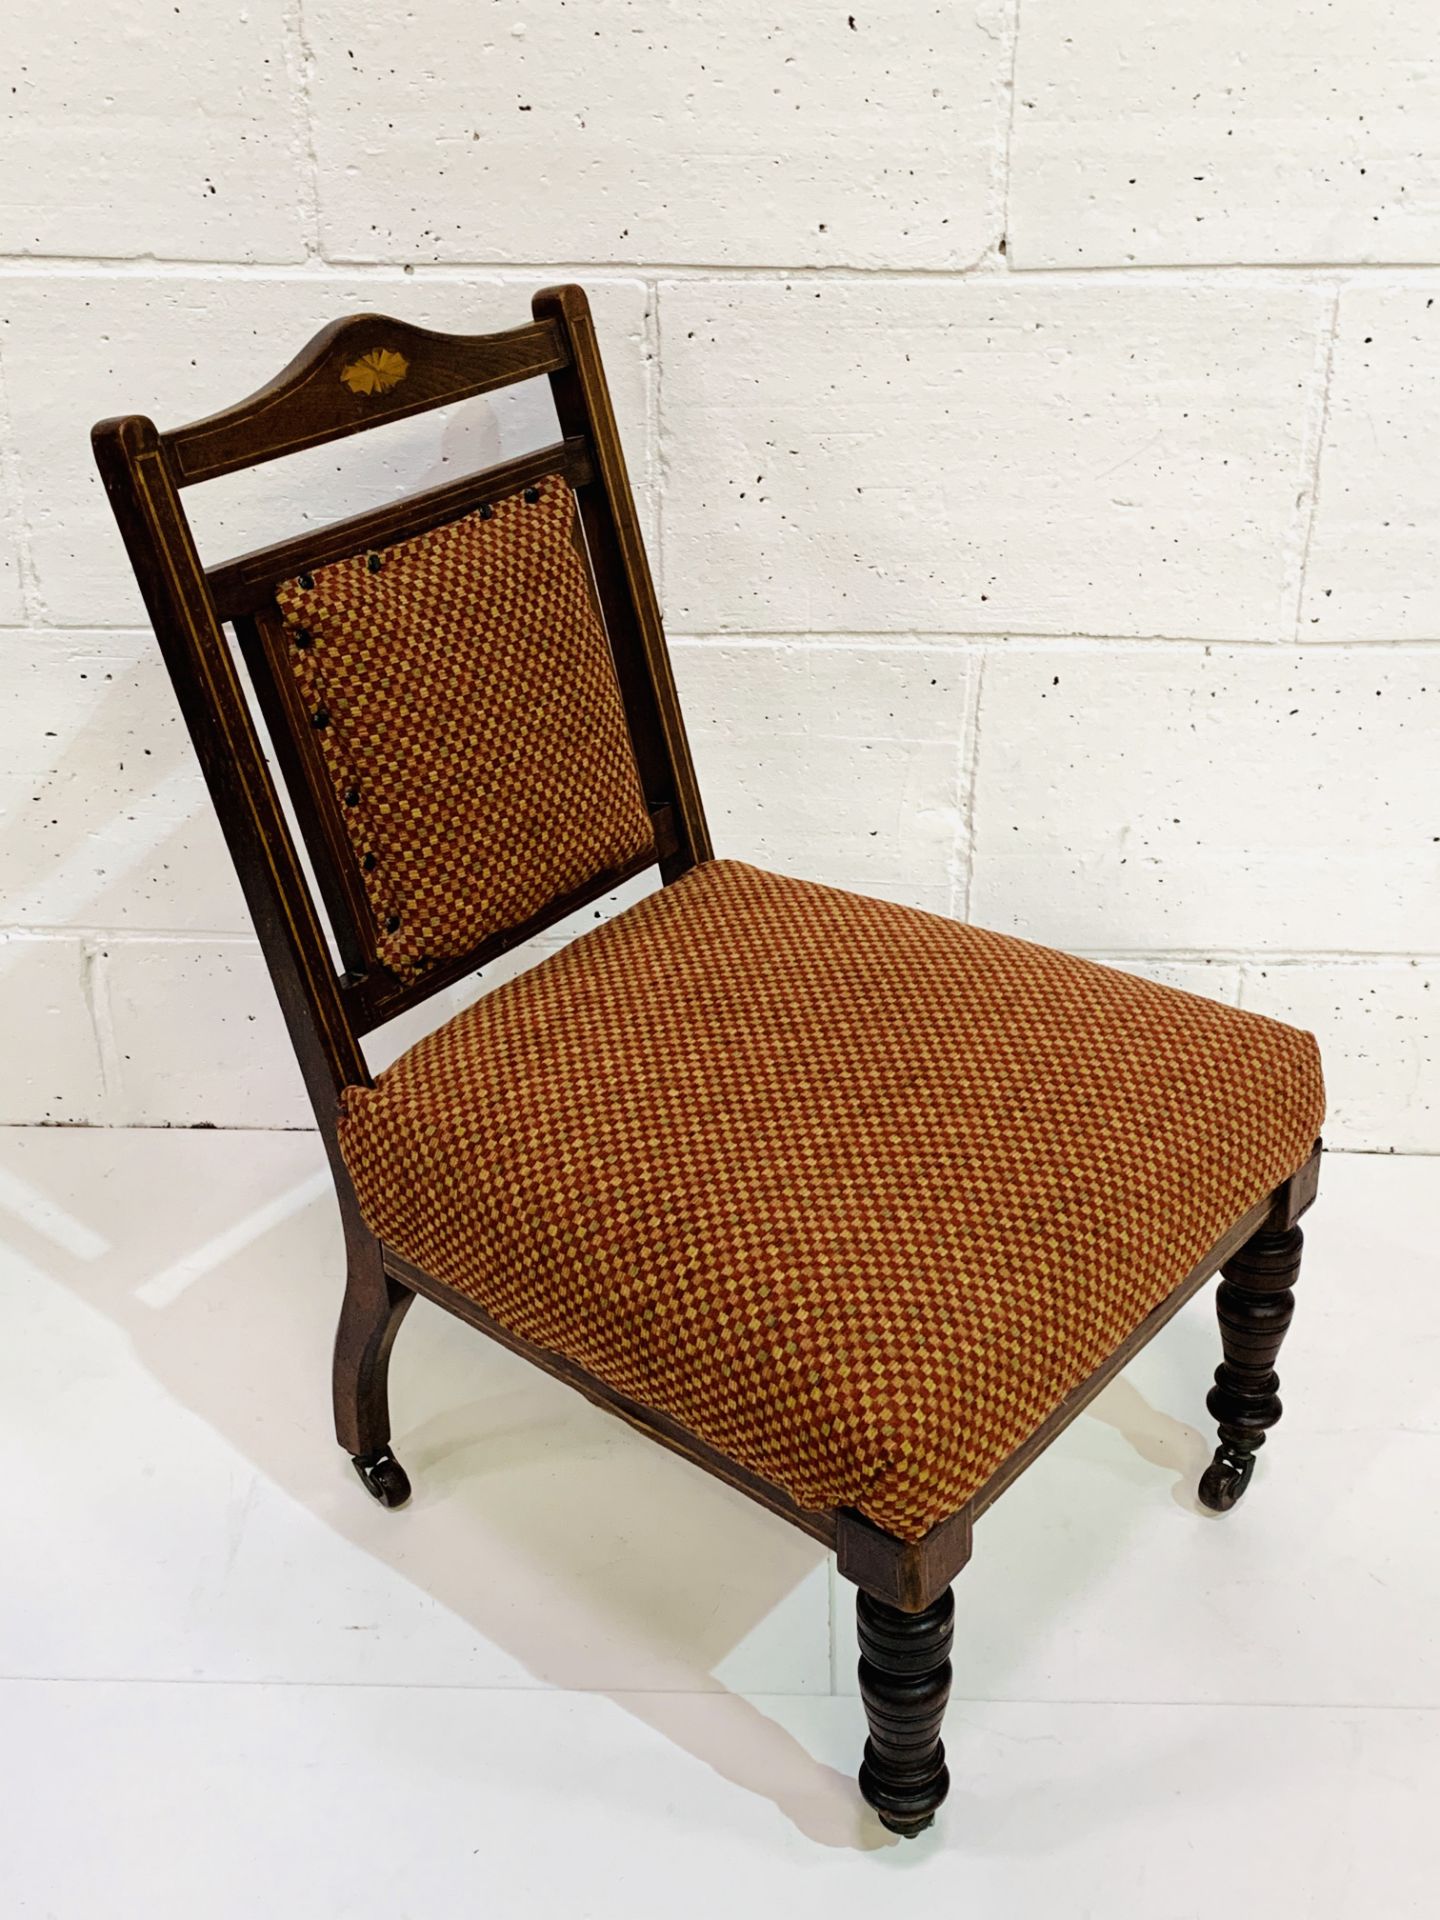 Mahogany Edwardian nursing chair with fan inlay and stringing. - Image 2 of 3